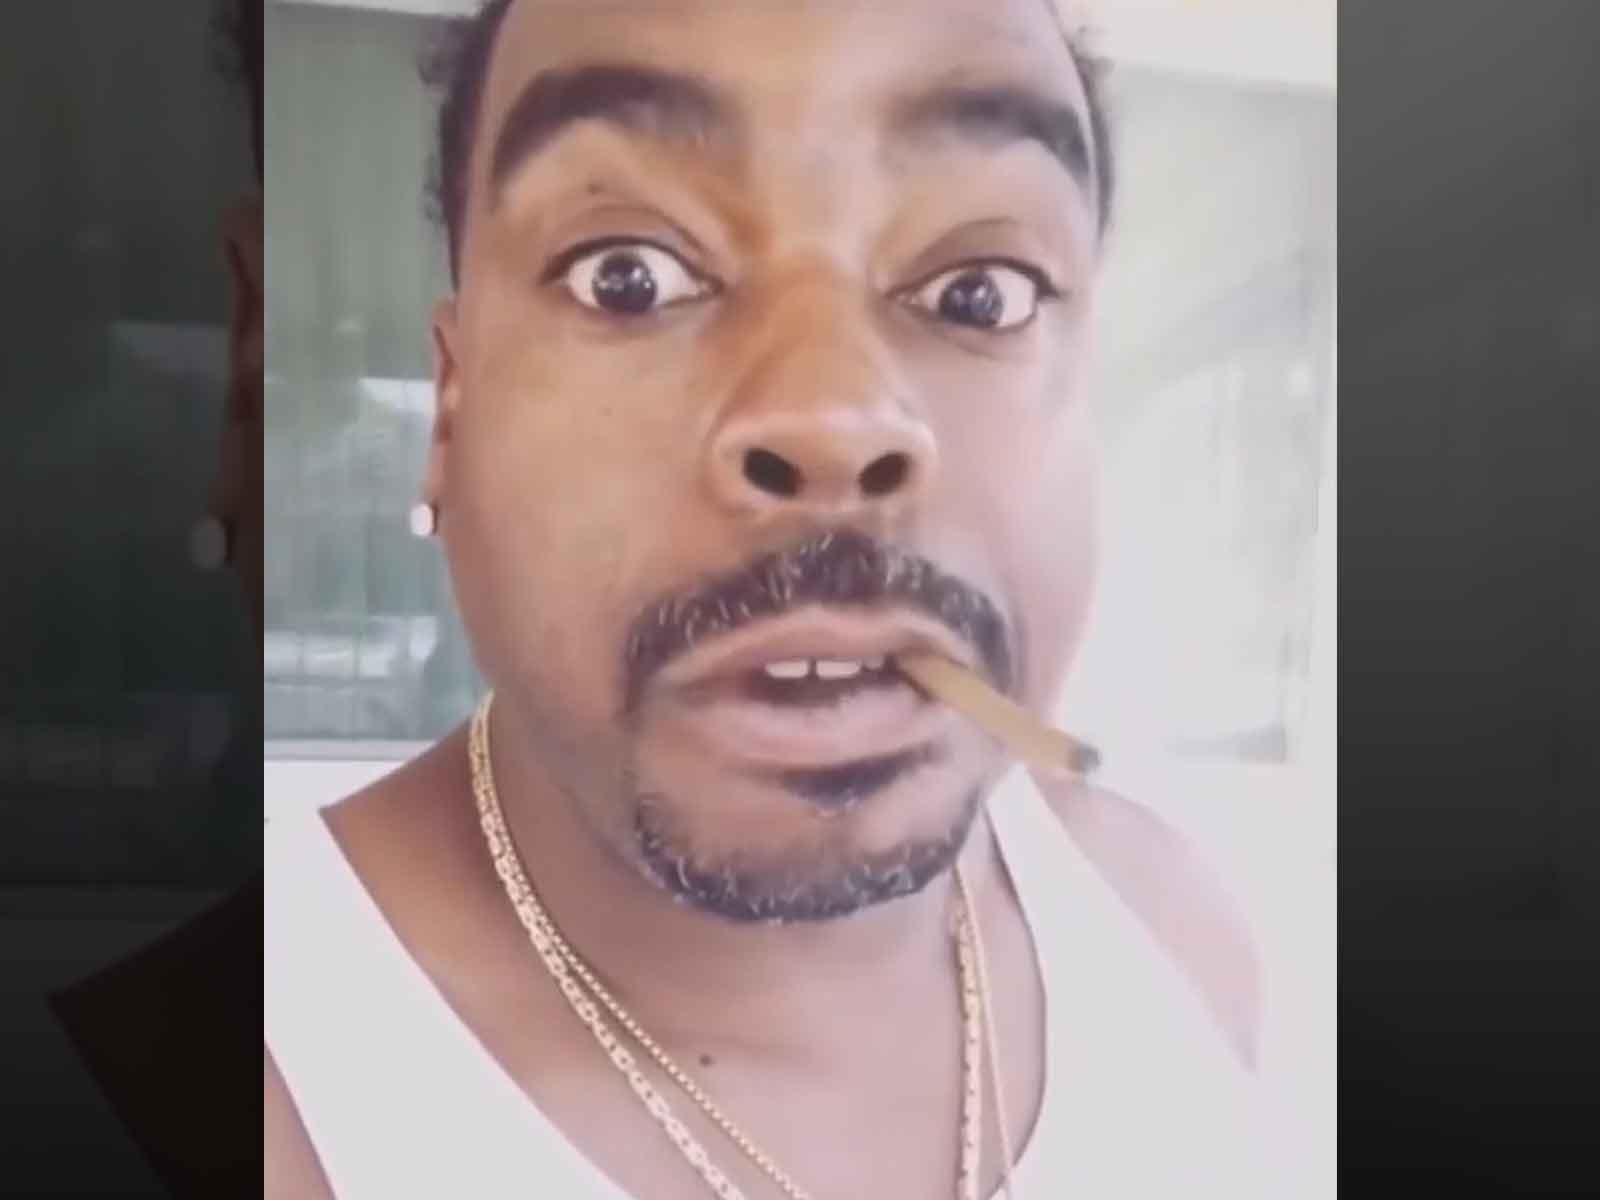 Daz Dillinger Puts the Green Light on Kanye West: ‘Stay in Calabasas’